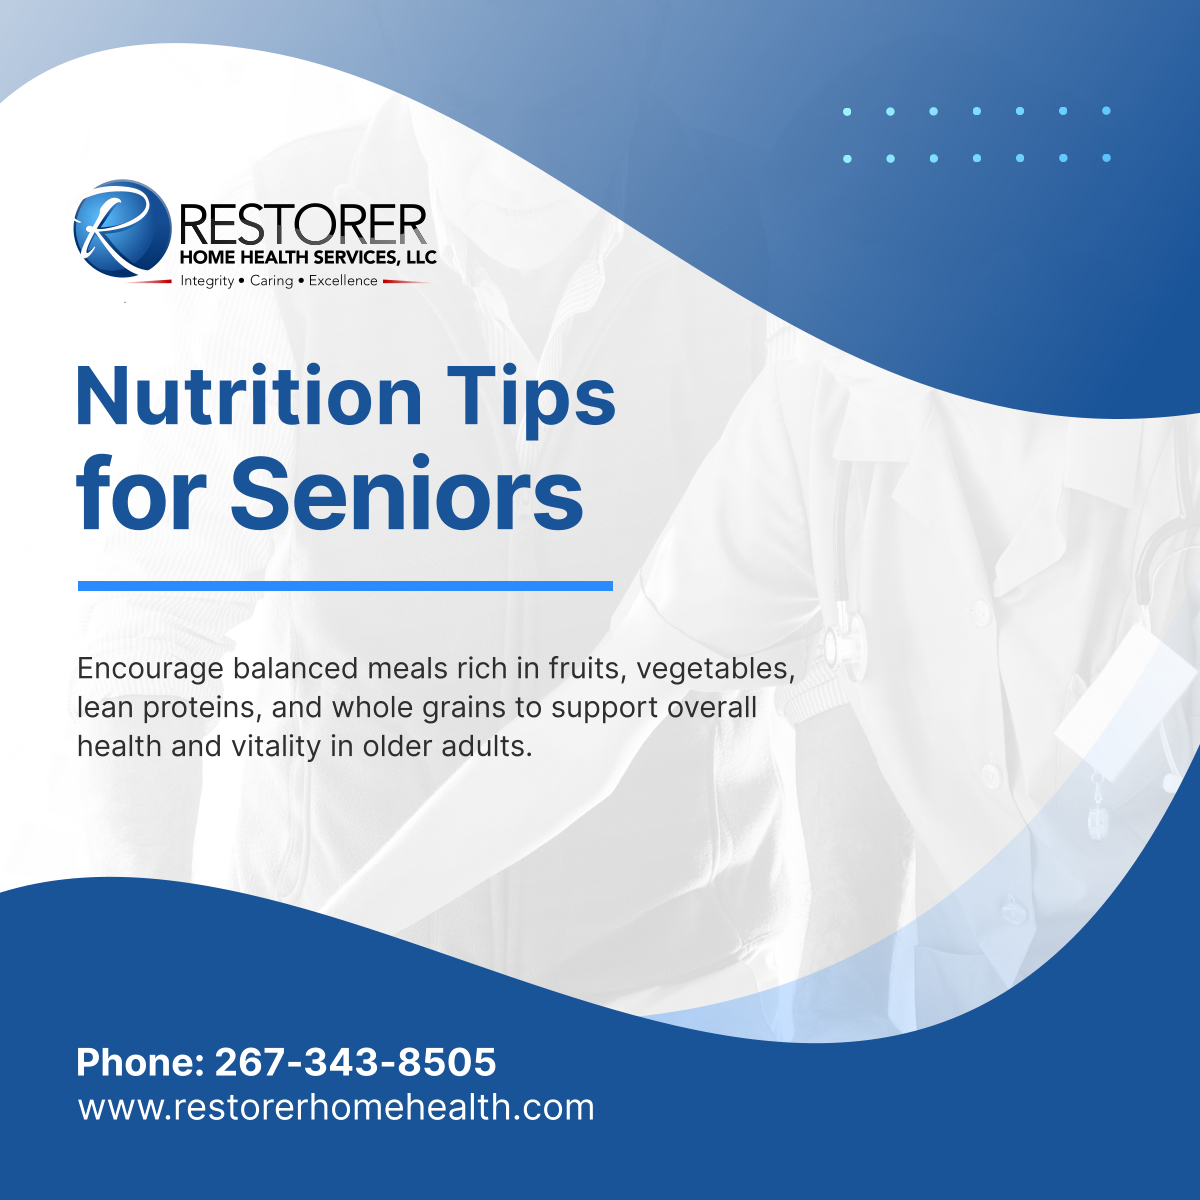 Good nutrition is key to staying healthy as we age. Learn simple ways to ensure your loved ones are getting the nutrients they need. 

#NutritionTips #PhiladelphiaPA #HomeHealthcare